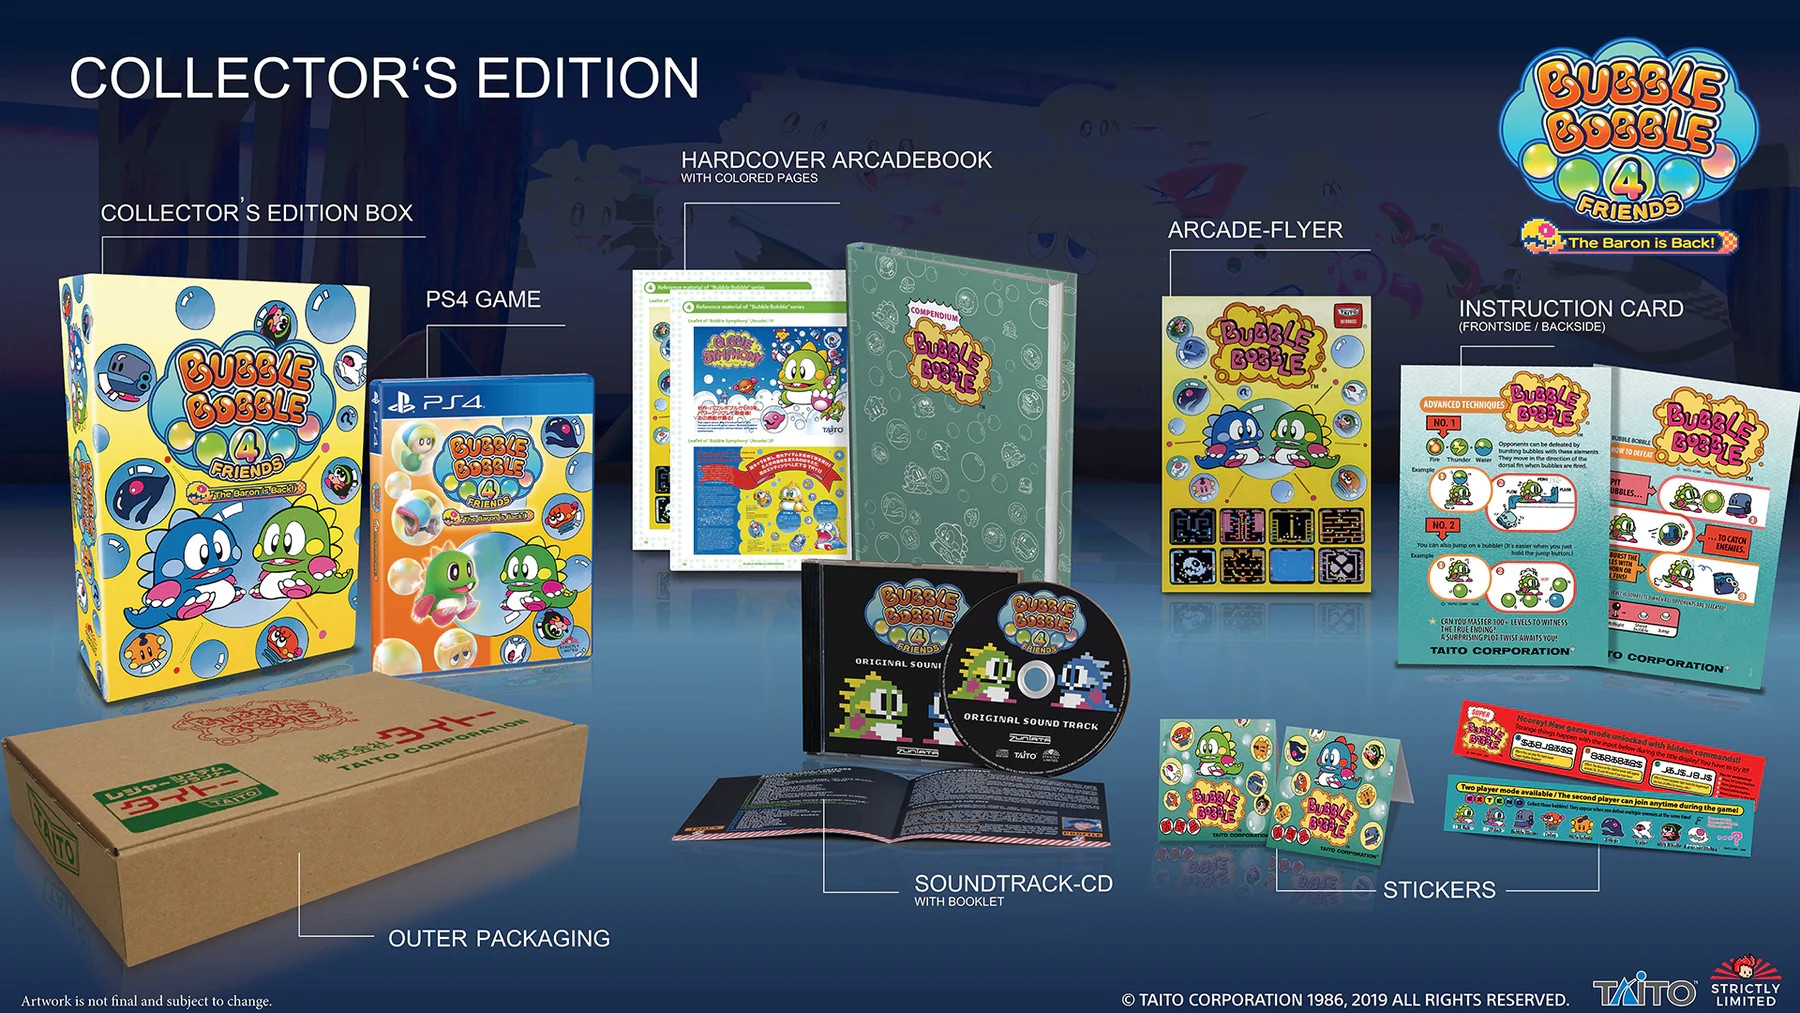 Bubble Bobble 4: Friends the Baron is Back!  - Collector's Edition (PS4), Strictly Limited Games